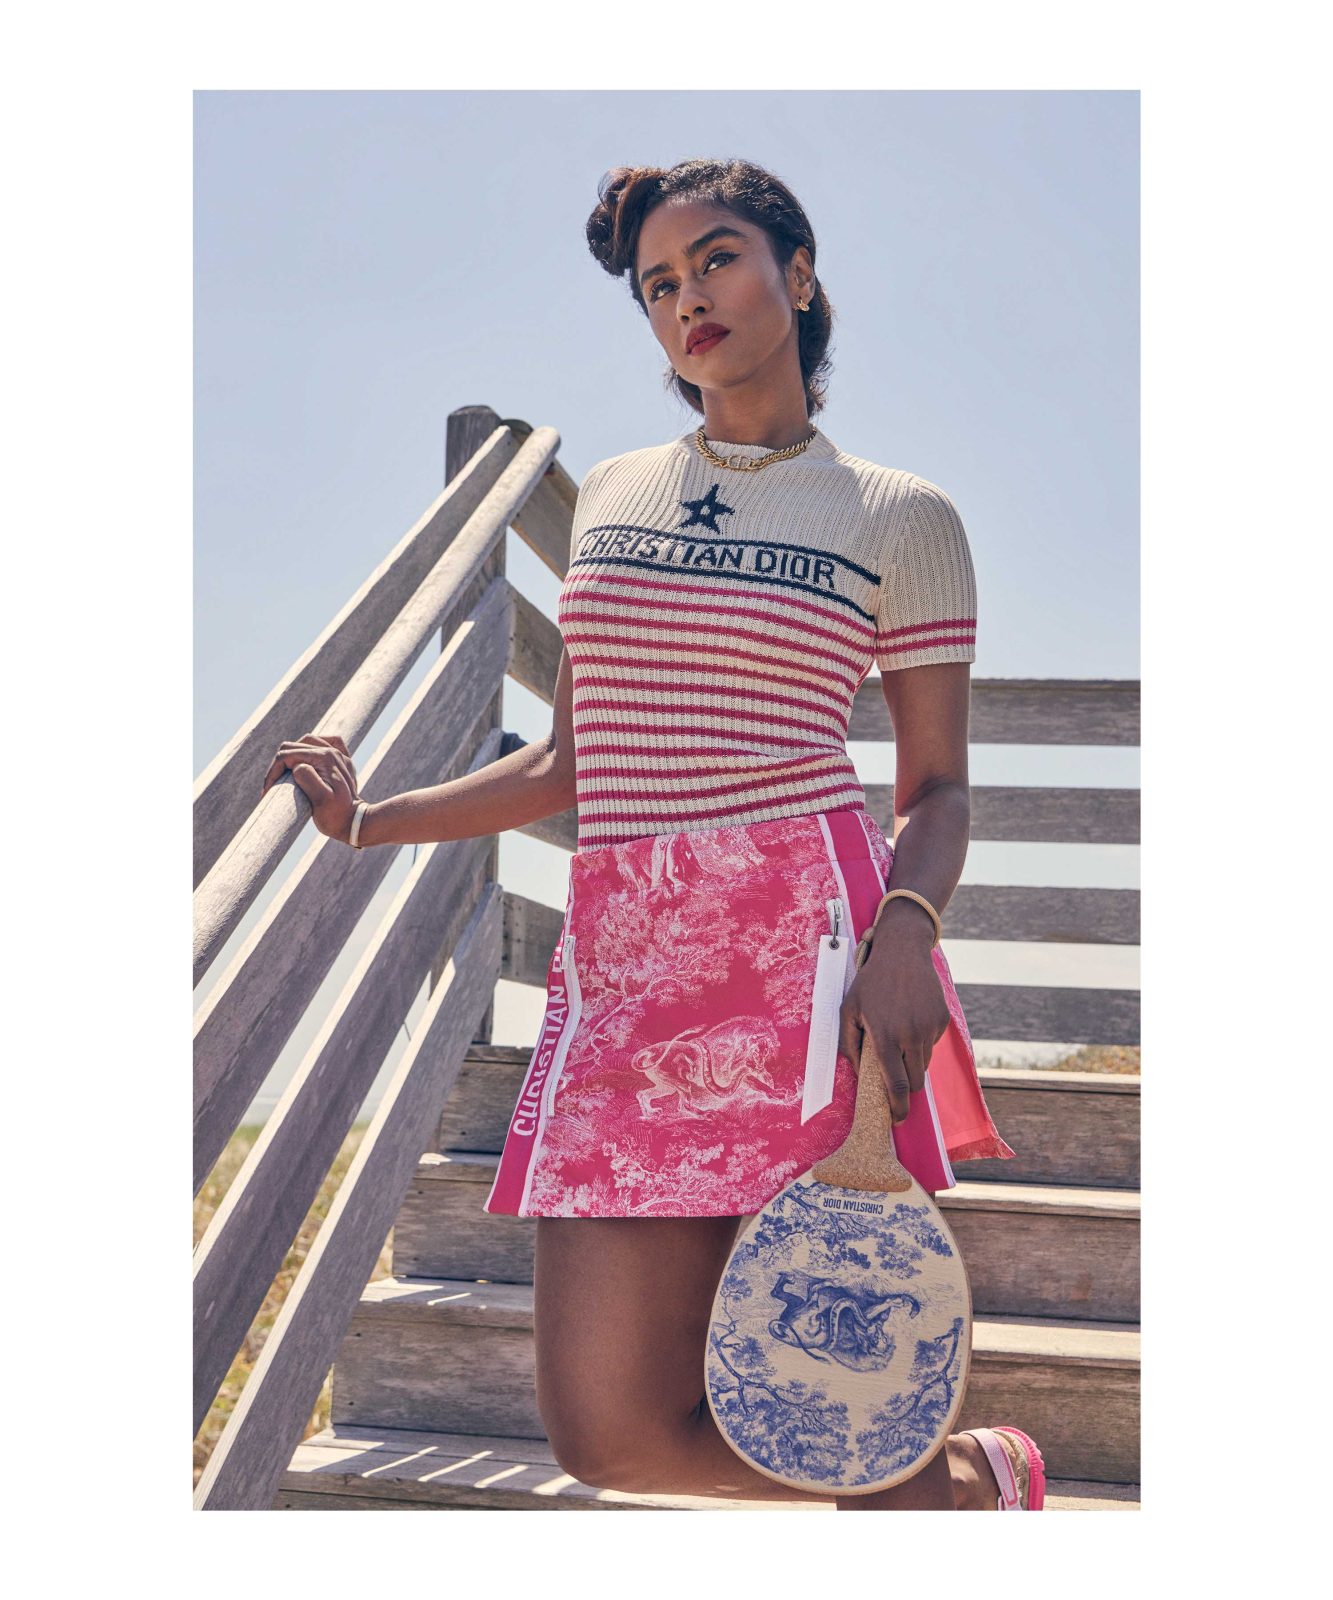 Welcome To The Dioriviera: Haute Living's Exclusive Editorial Featuring Dior's New Summer Capsule Collection